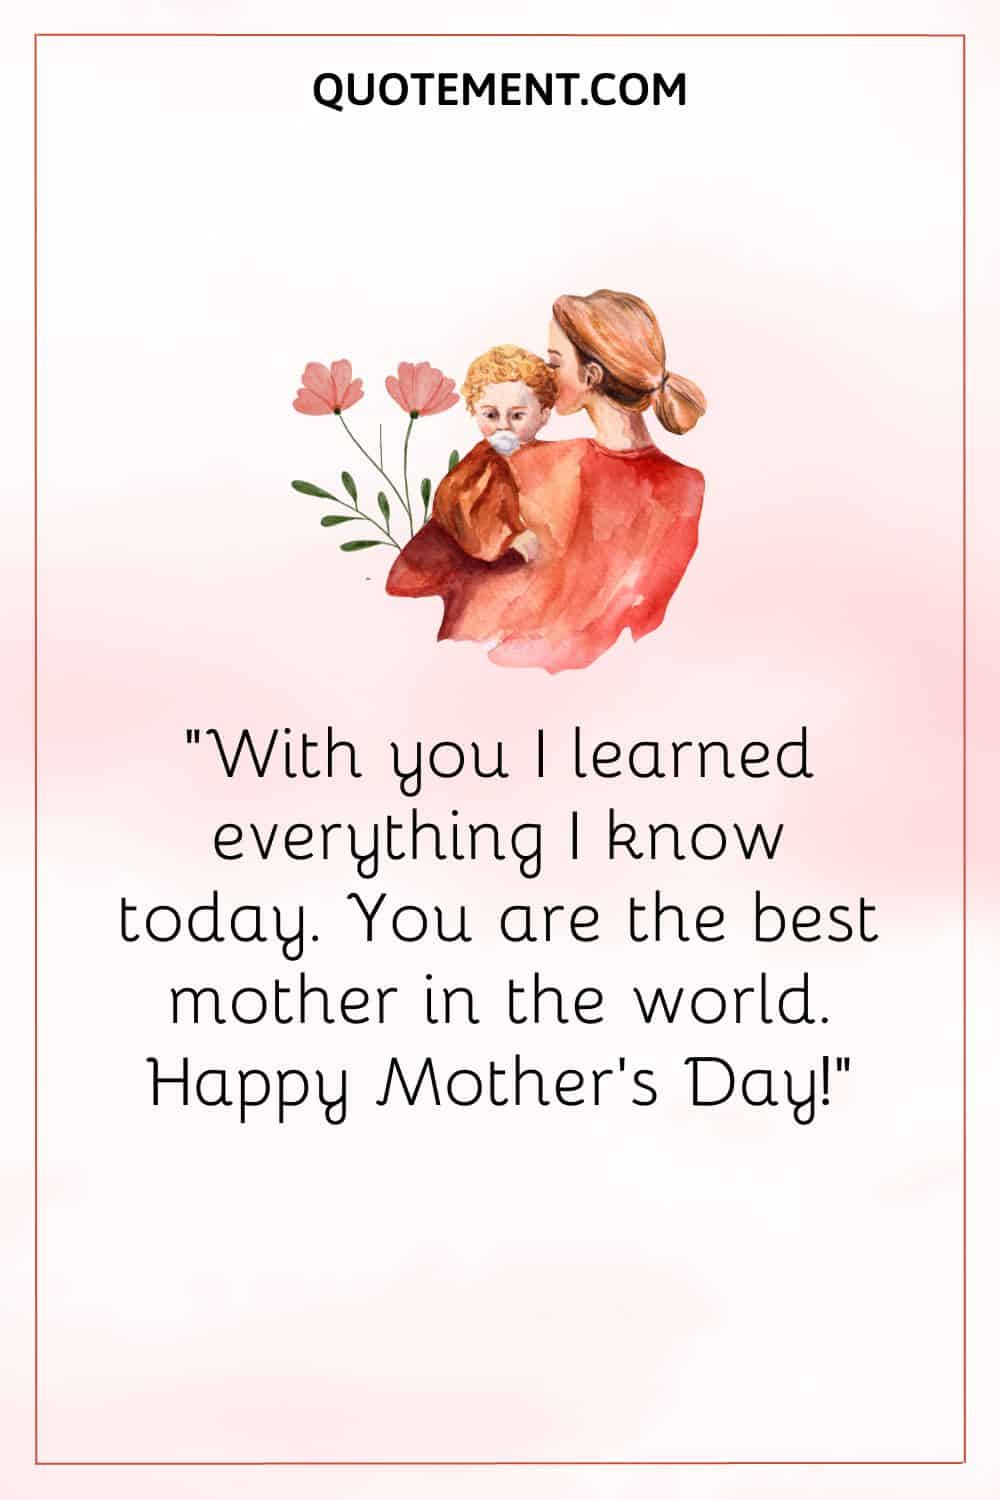 50 Beautiful And Touching Mother's Day Quotes For Sister